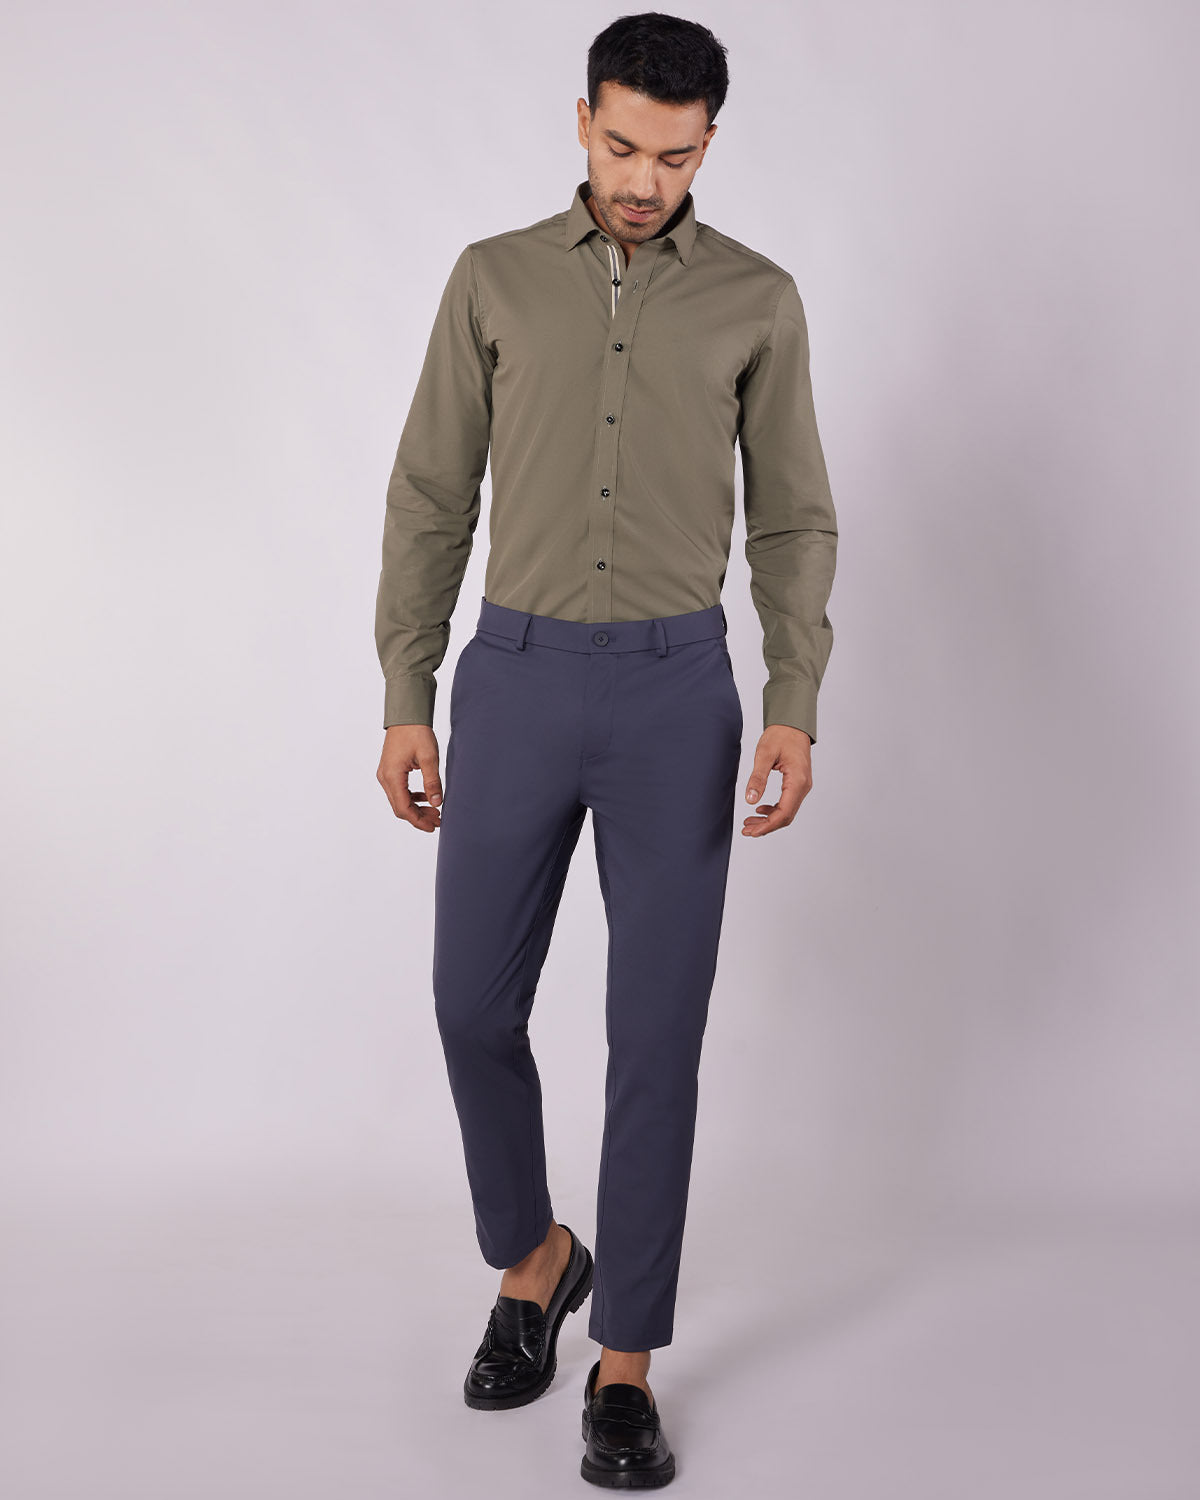 Buy Cargo Clothes Online in India | SNITCH